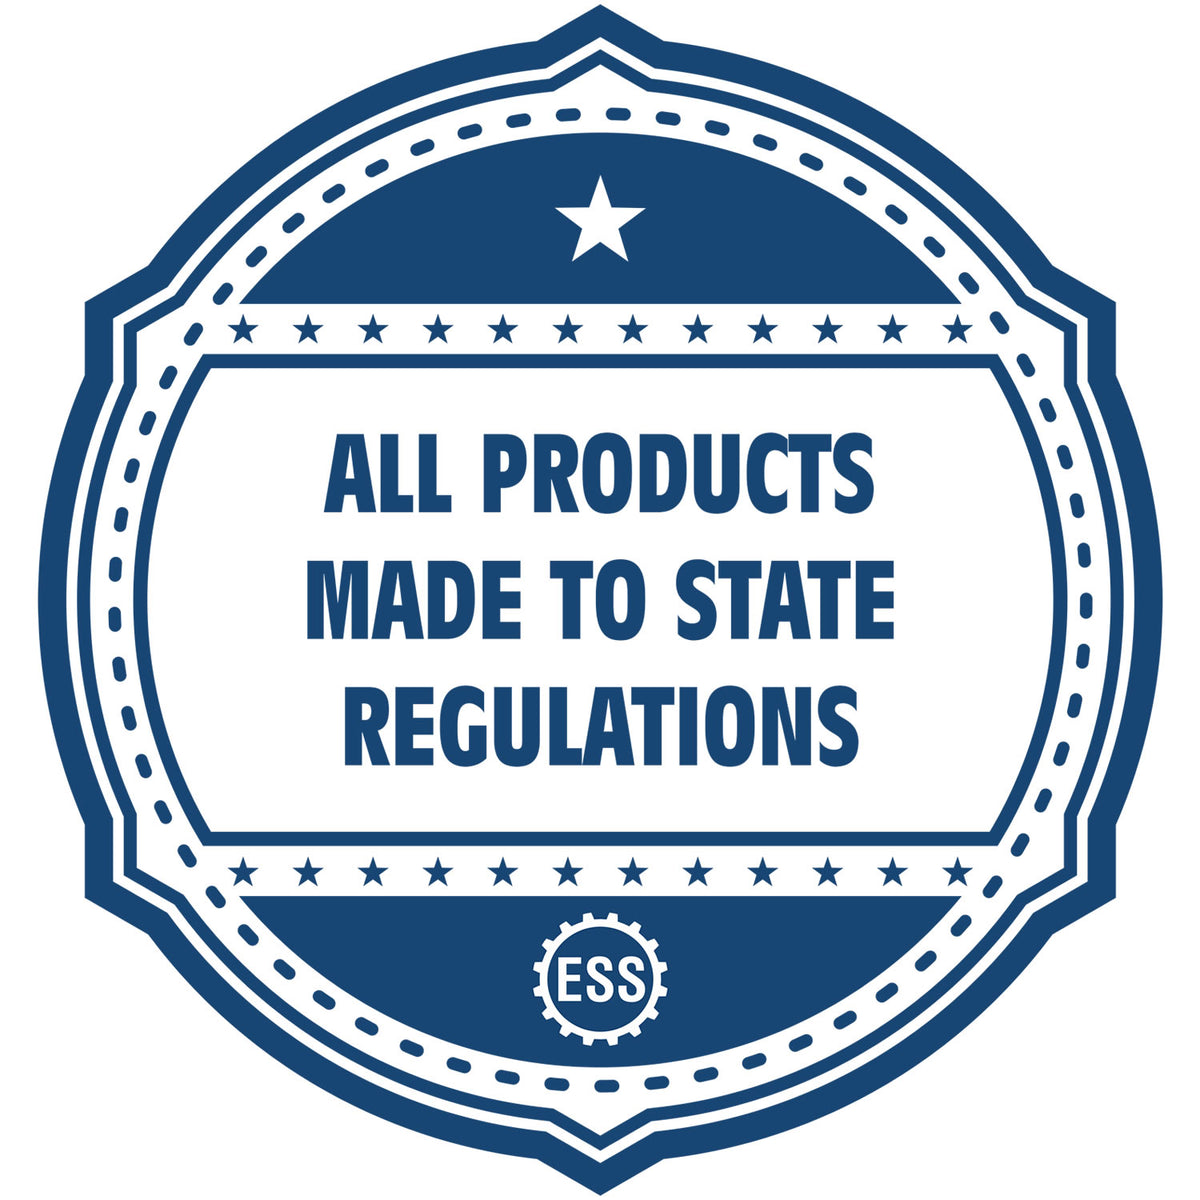 An icon or badge element for the Georgia Professional Engineer Seal Stamp showing that this product is made in compliance with state regulations.